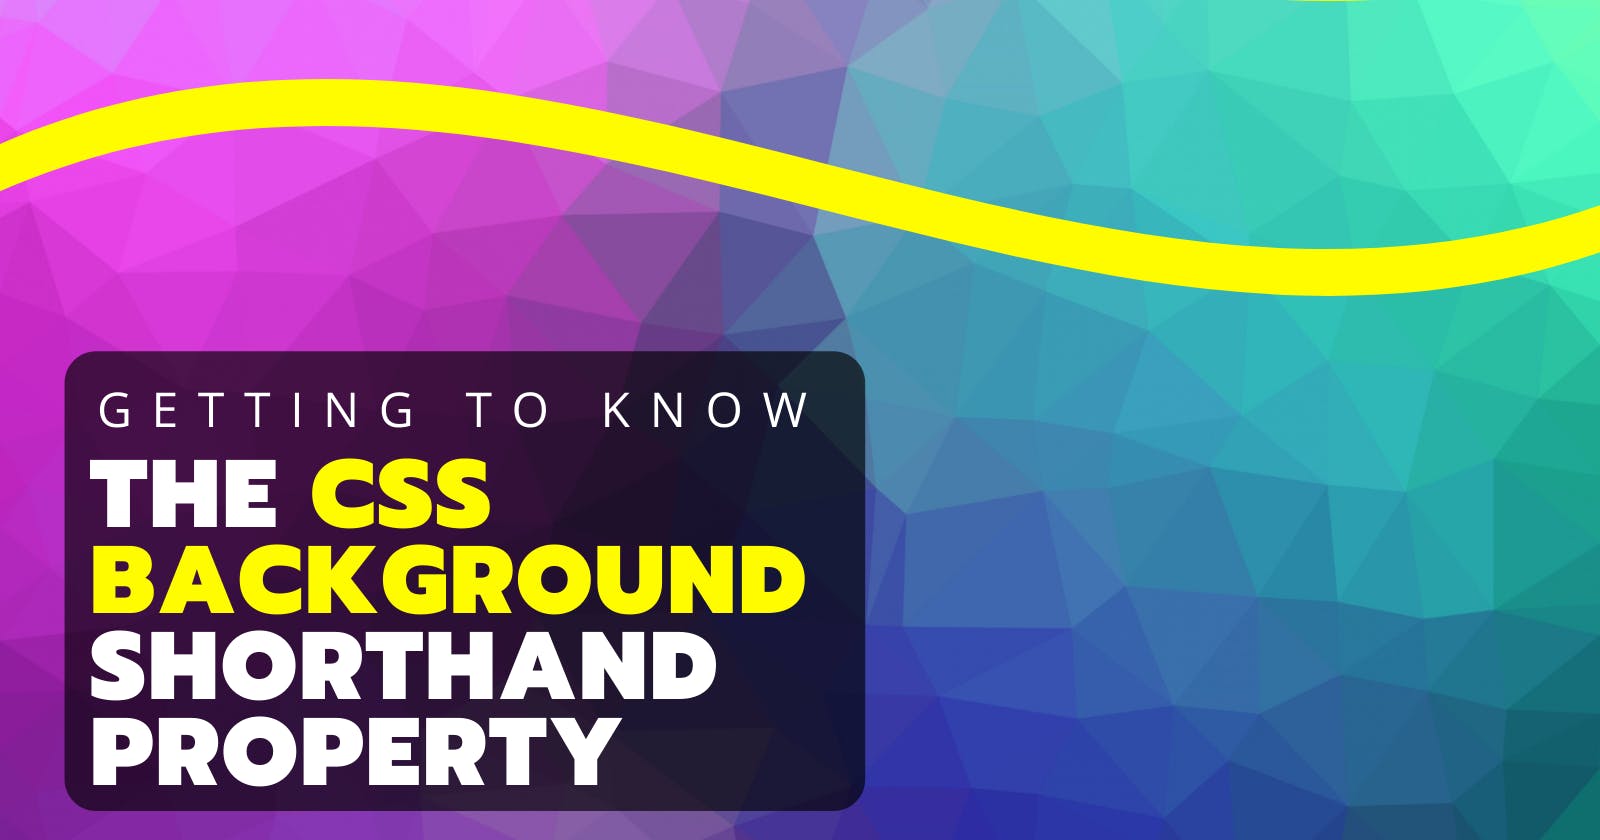 Getting to Know the CSS Background Shorthand Property